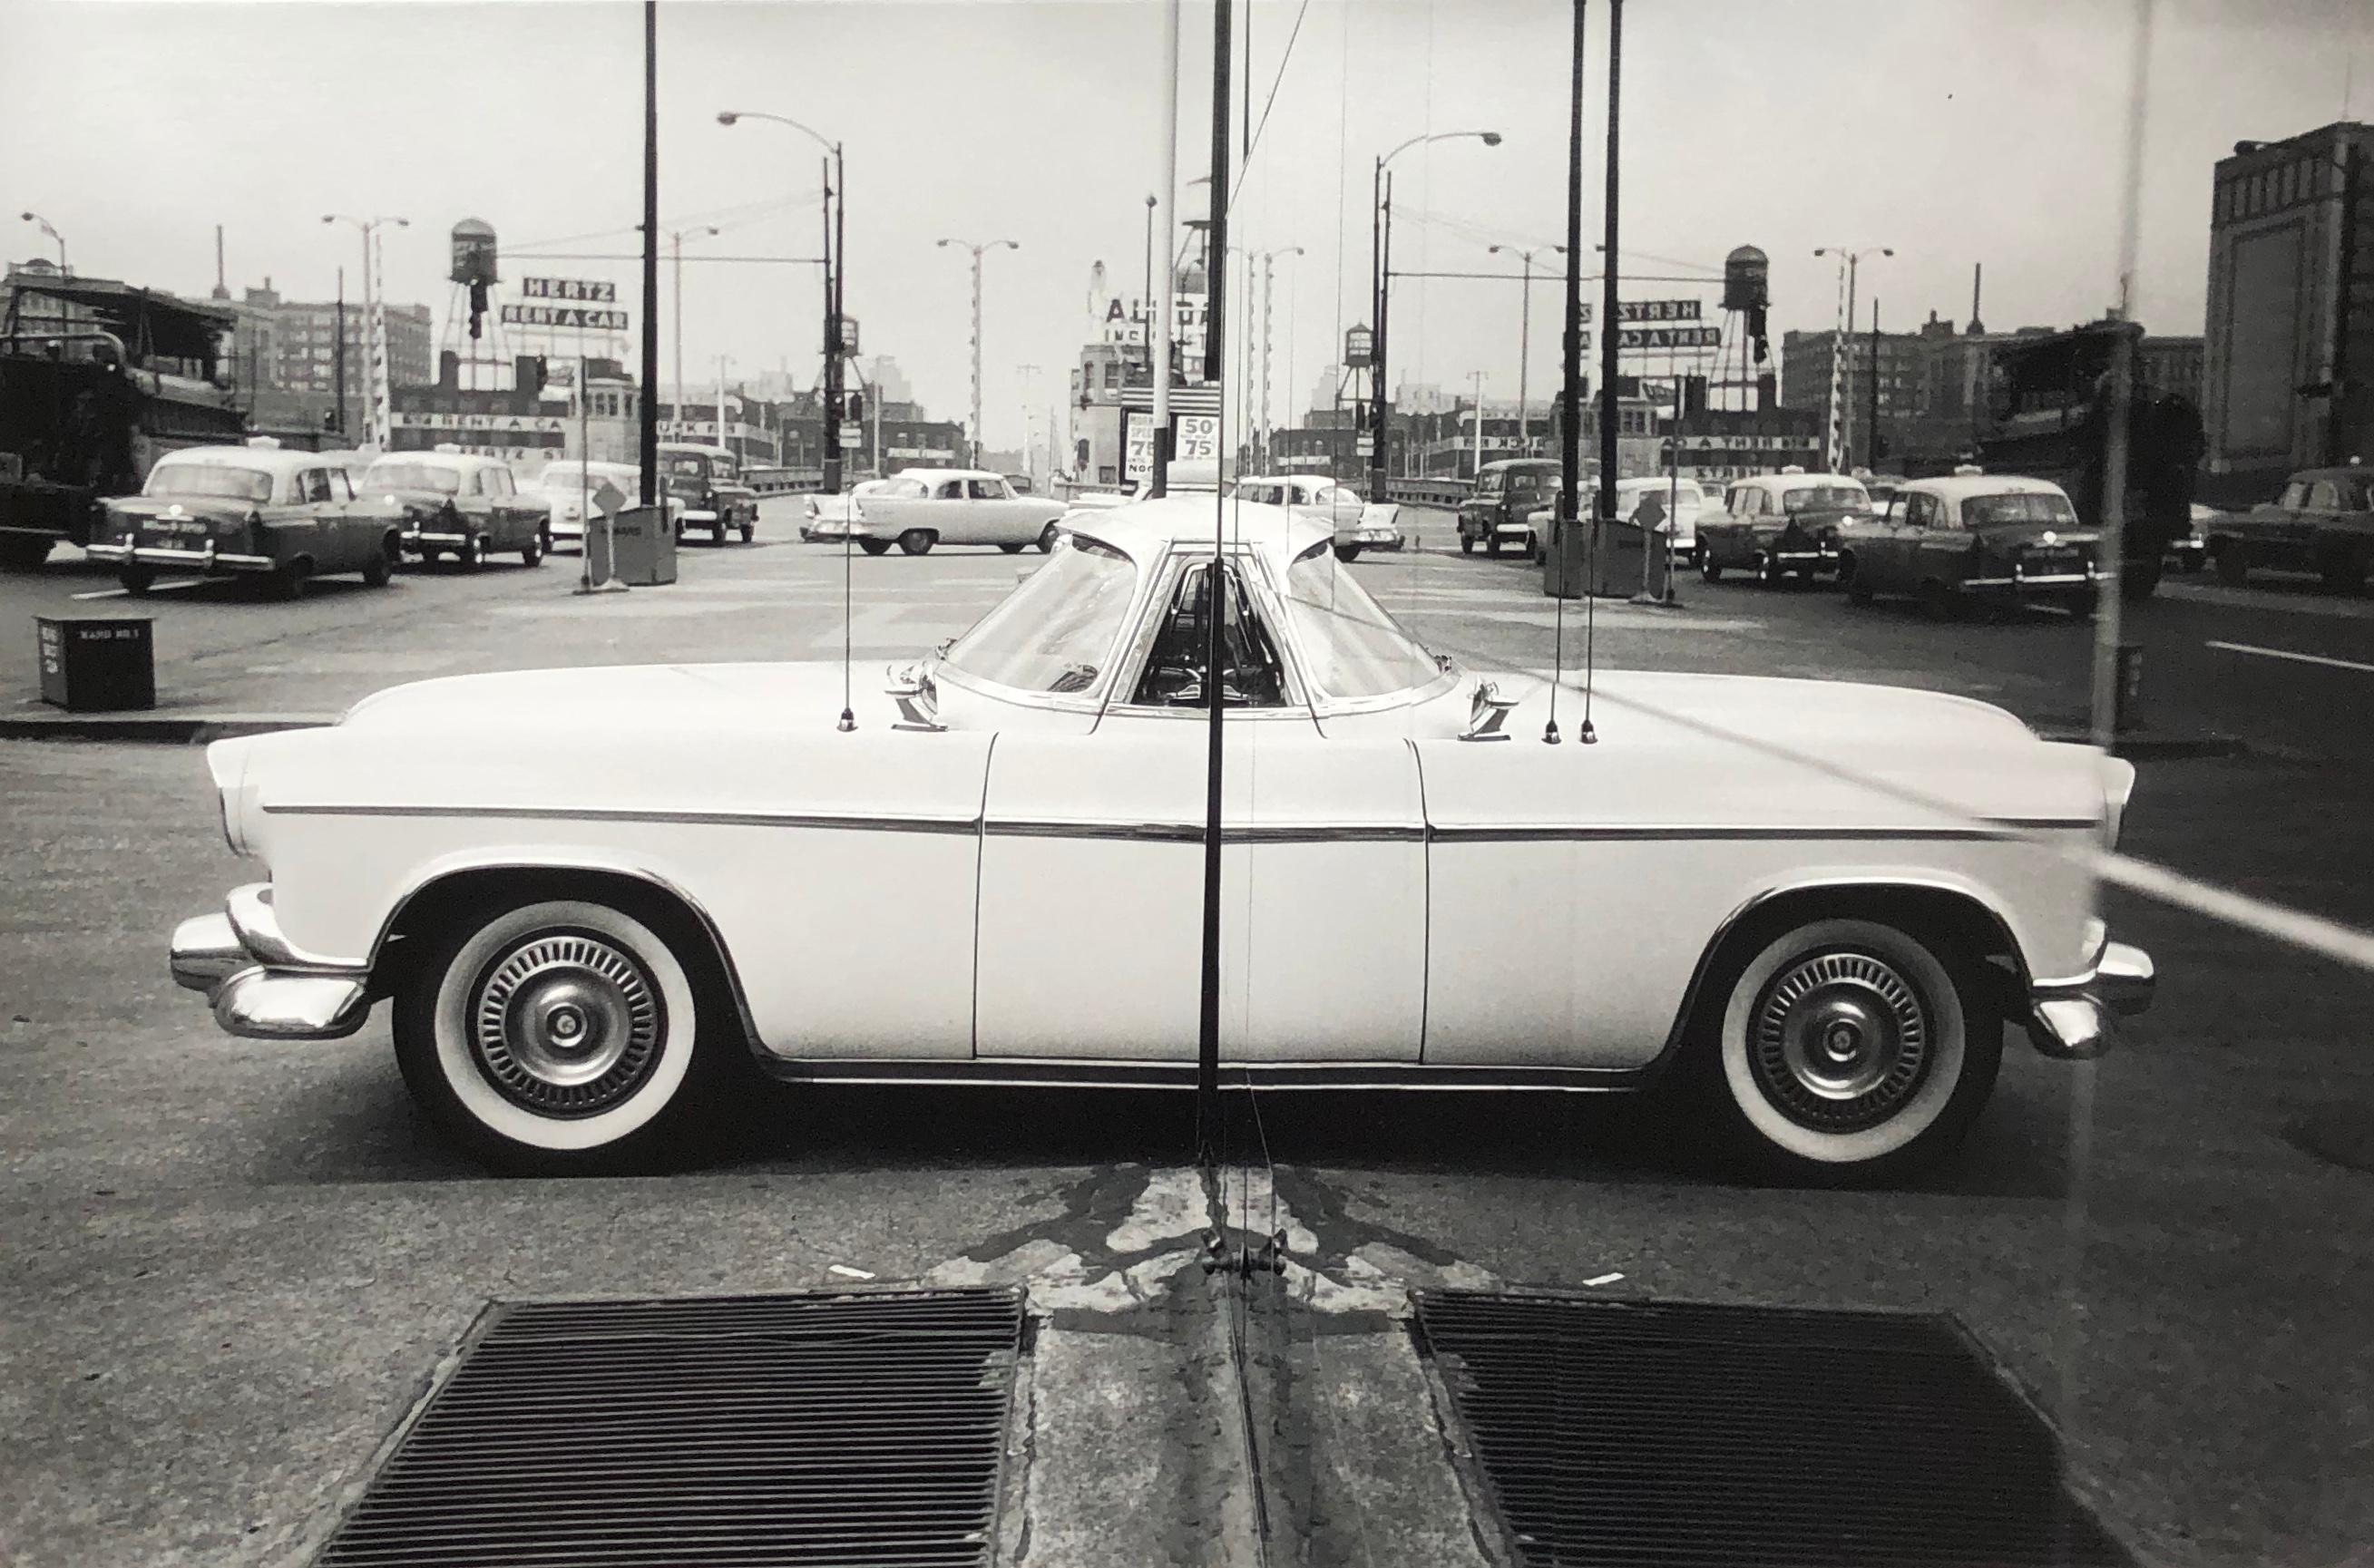 Car Reflection, 1958, Black and White Photograph Appeared in LIFE Magazine